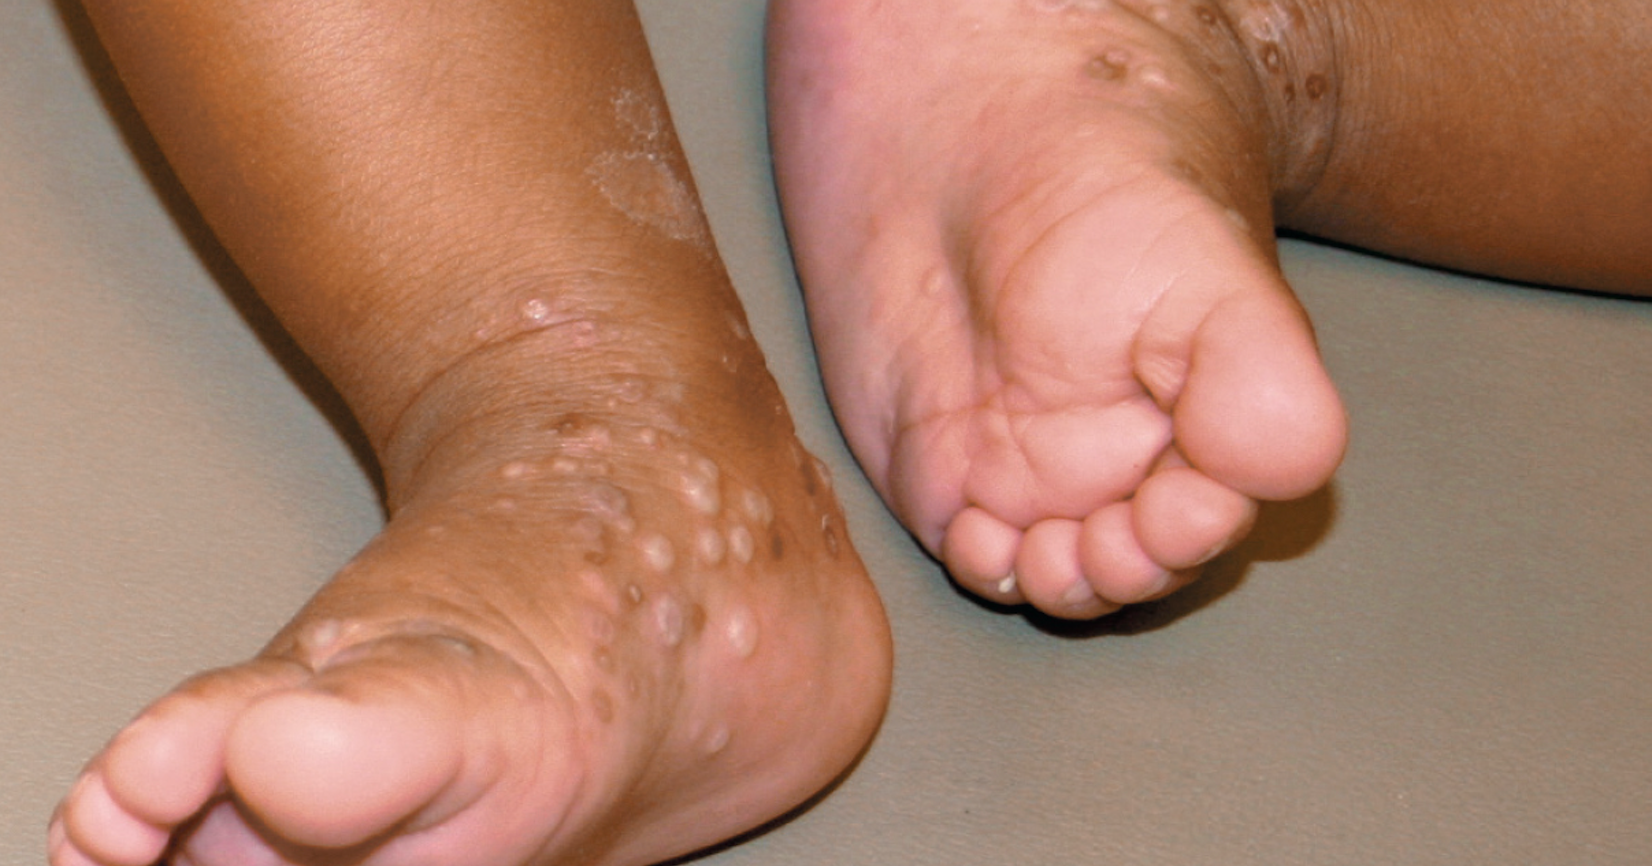 Infant’s pustular eruption is not scabies